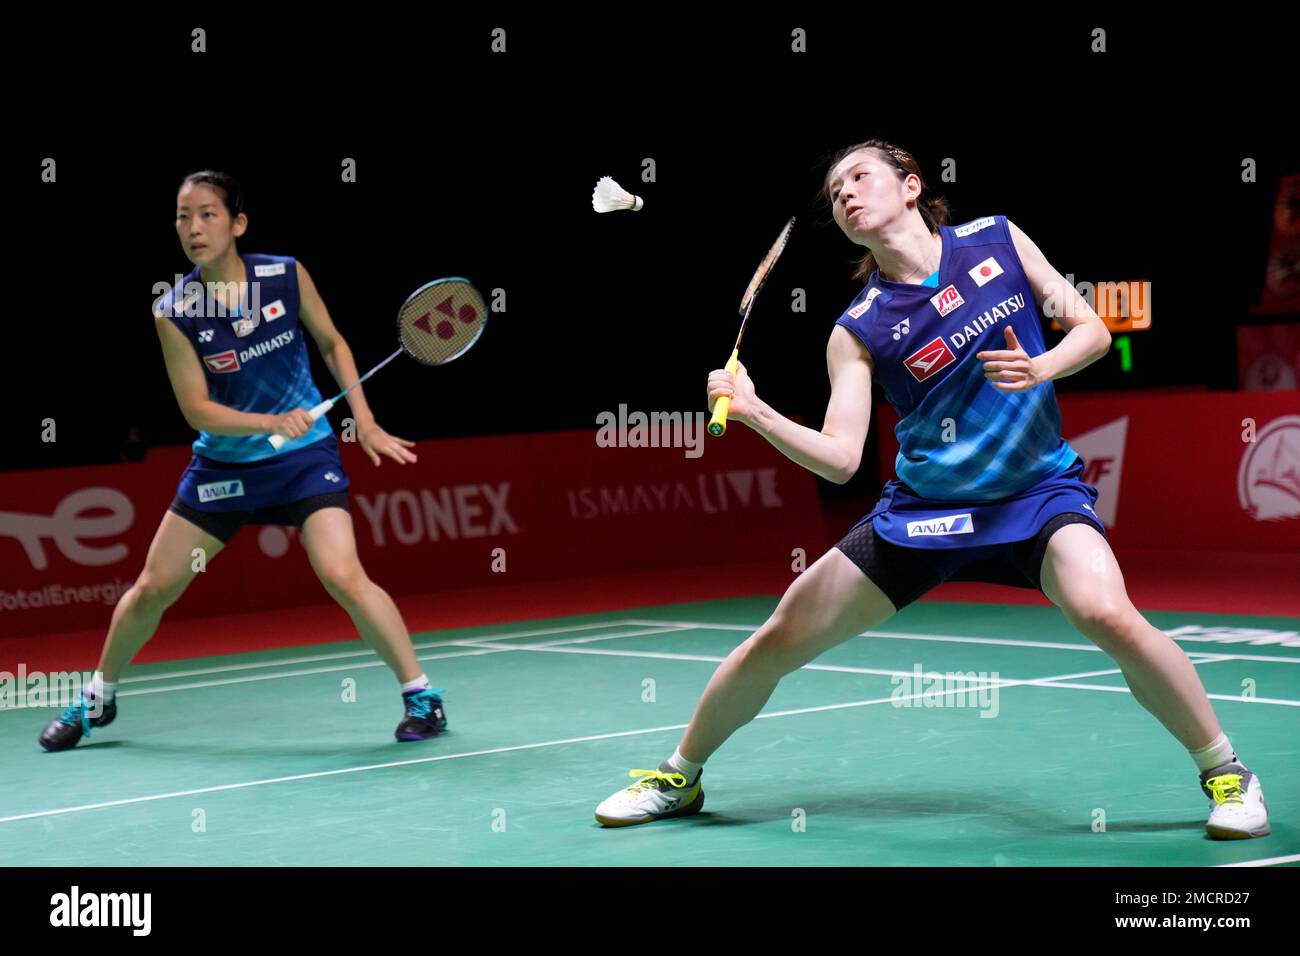 Japans Nami Matsuyama and Chiharu Shida, right, compete against Bulgarias gabriela Stoeva and Stefani Stoeva during their womens doubles badminton group stage match at the BWF World Tour Finals in Nusa Dua,